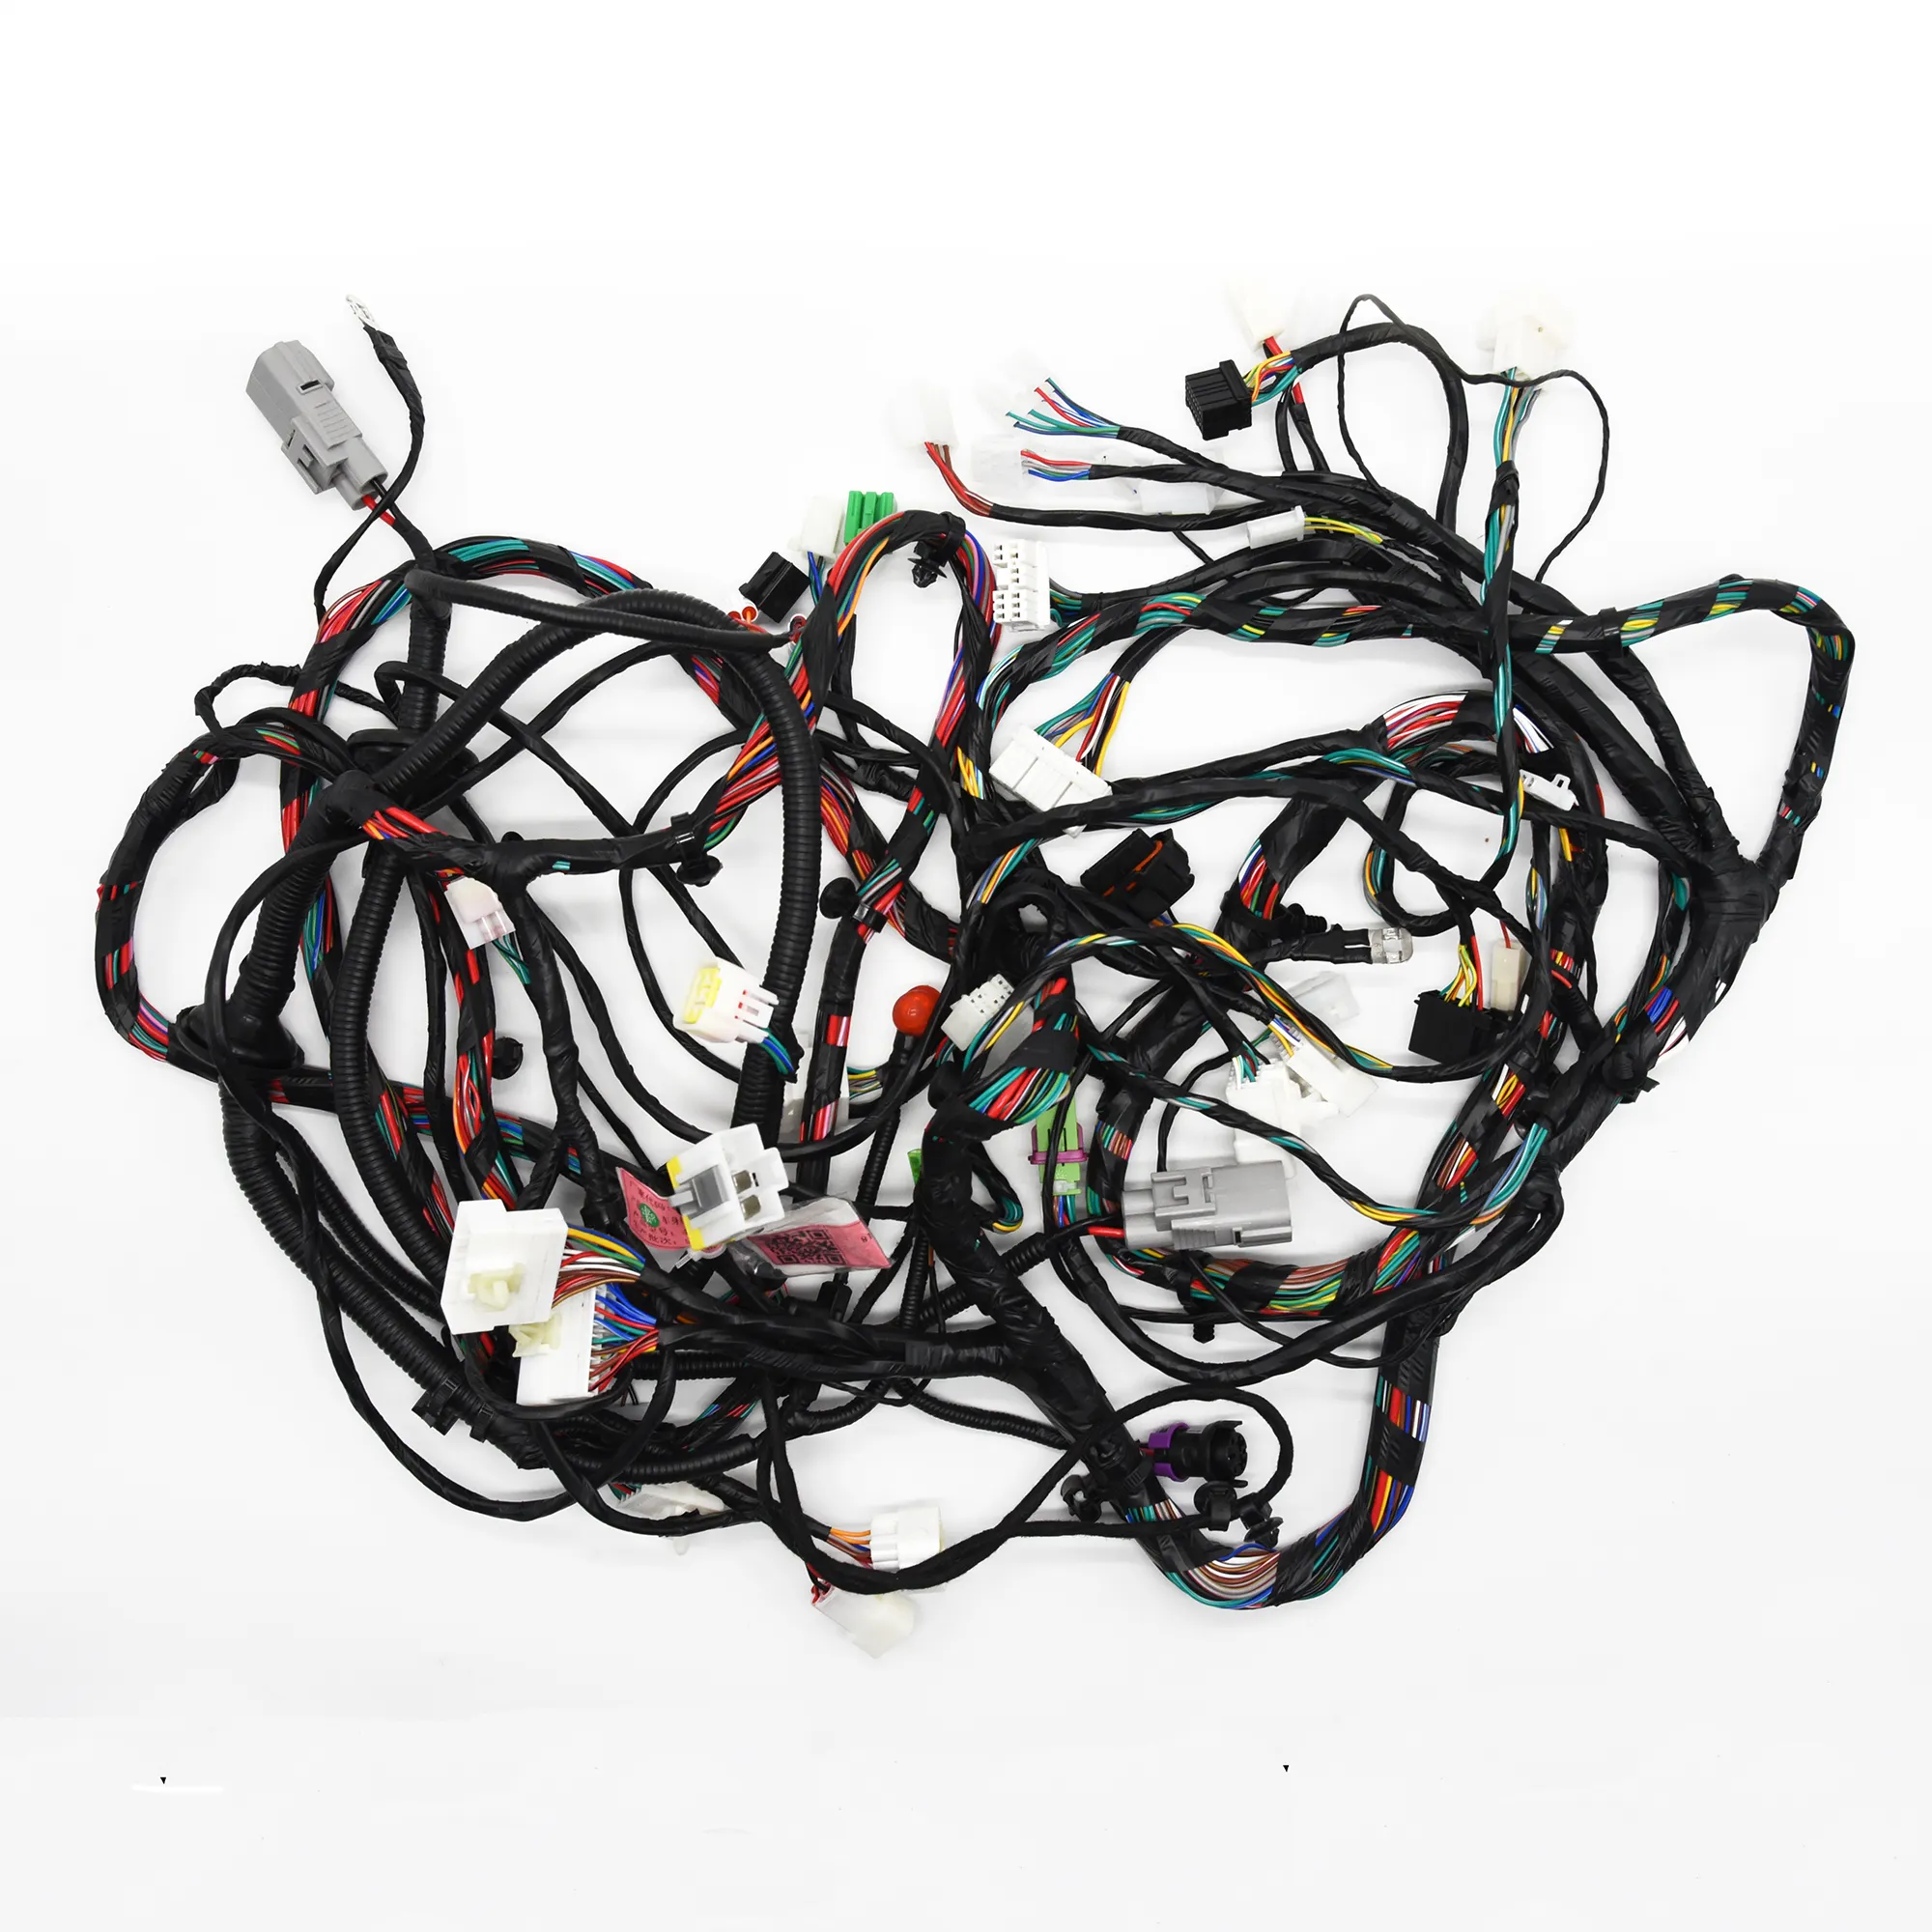 Hot sales New Energy Vehicle Wiring Harness Electric Vehicle Energy Storage Wiring Harness Power Connection Line